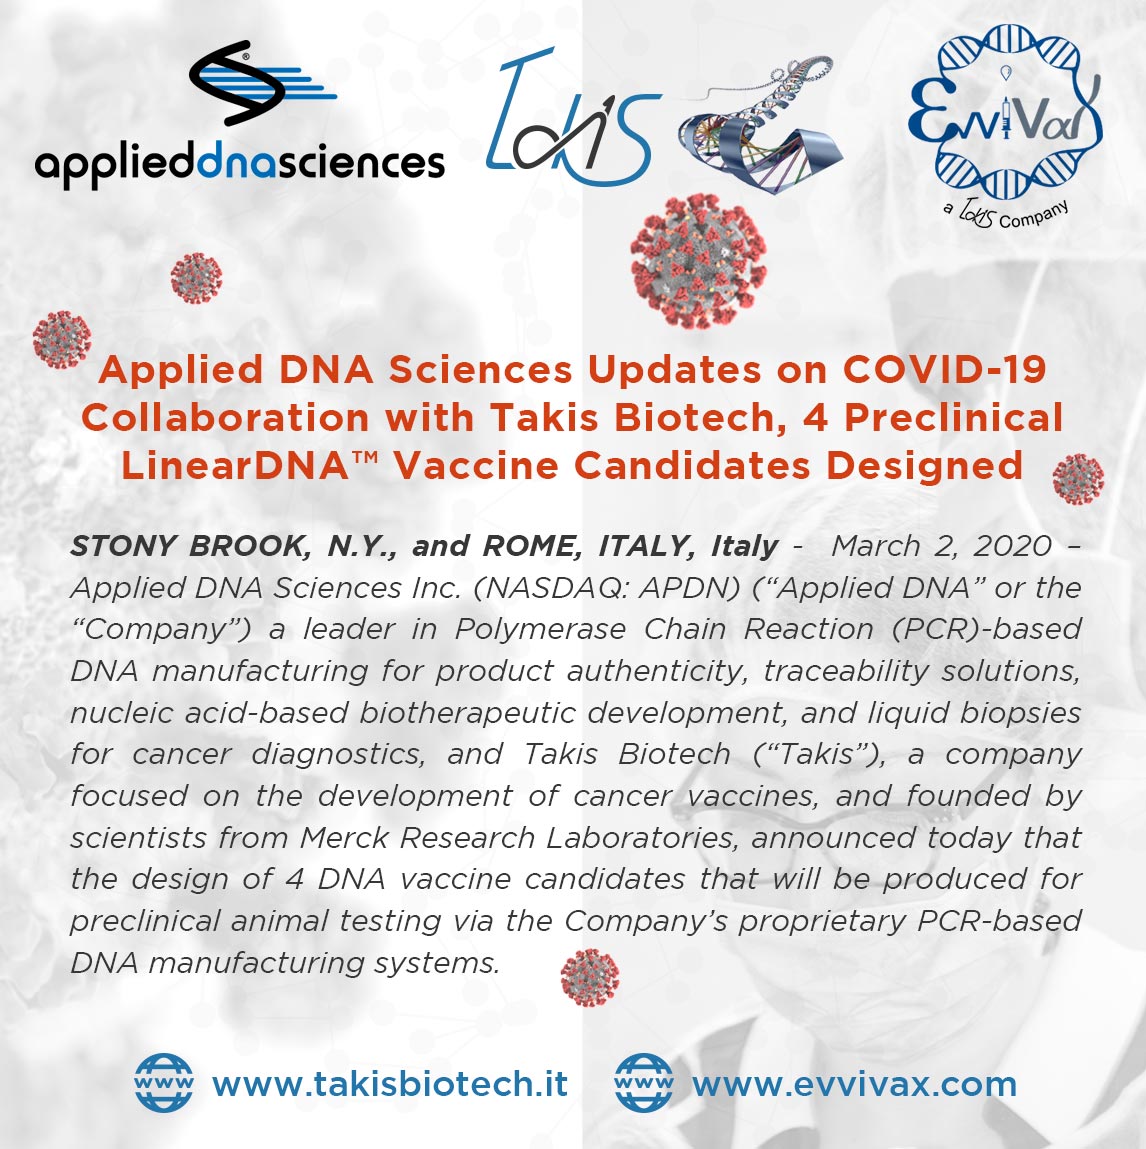 Applied DNA Sciences Updates on COVID-19 Collaboration with Takis Biotech, 4 Preclinical LinearDNA™ Vaccine Candidates Designed 